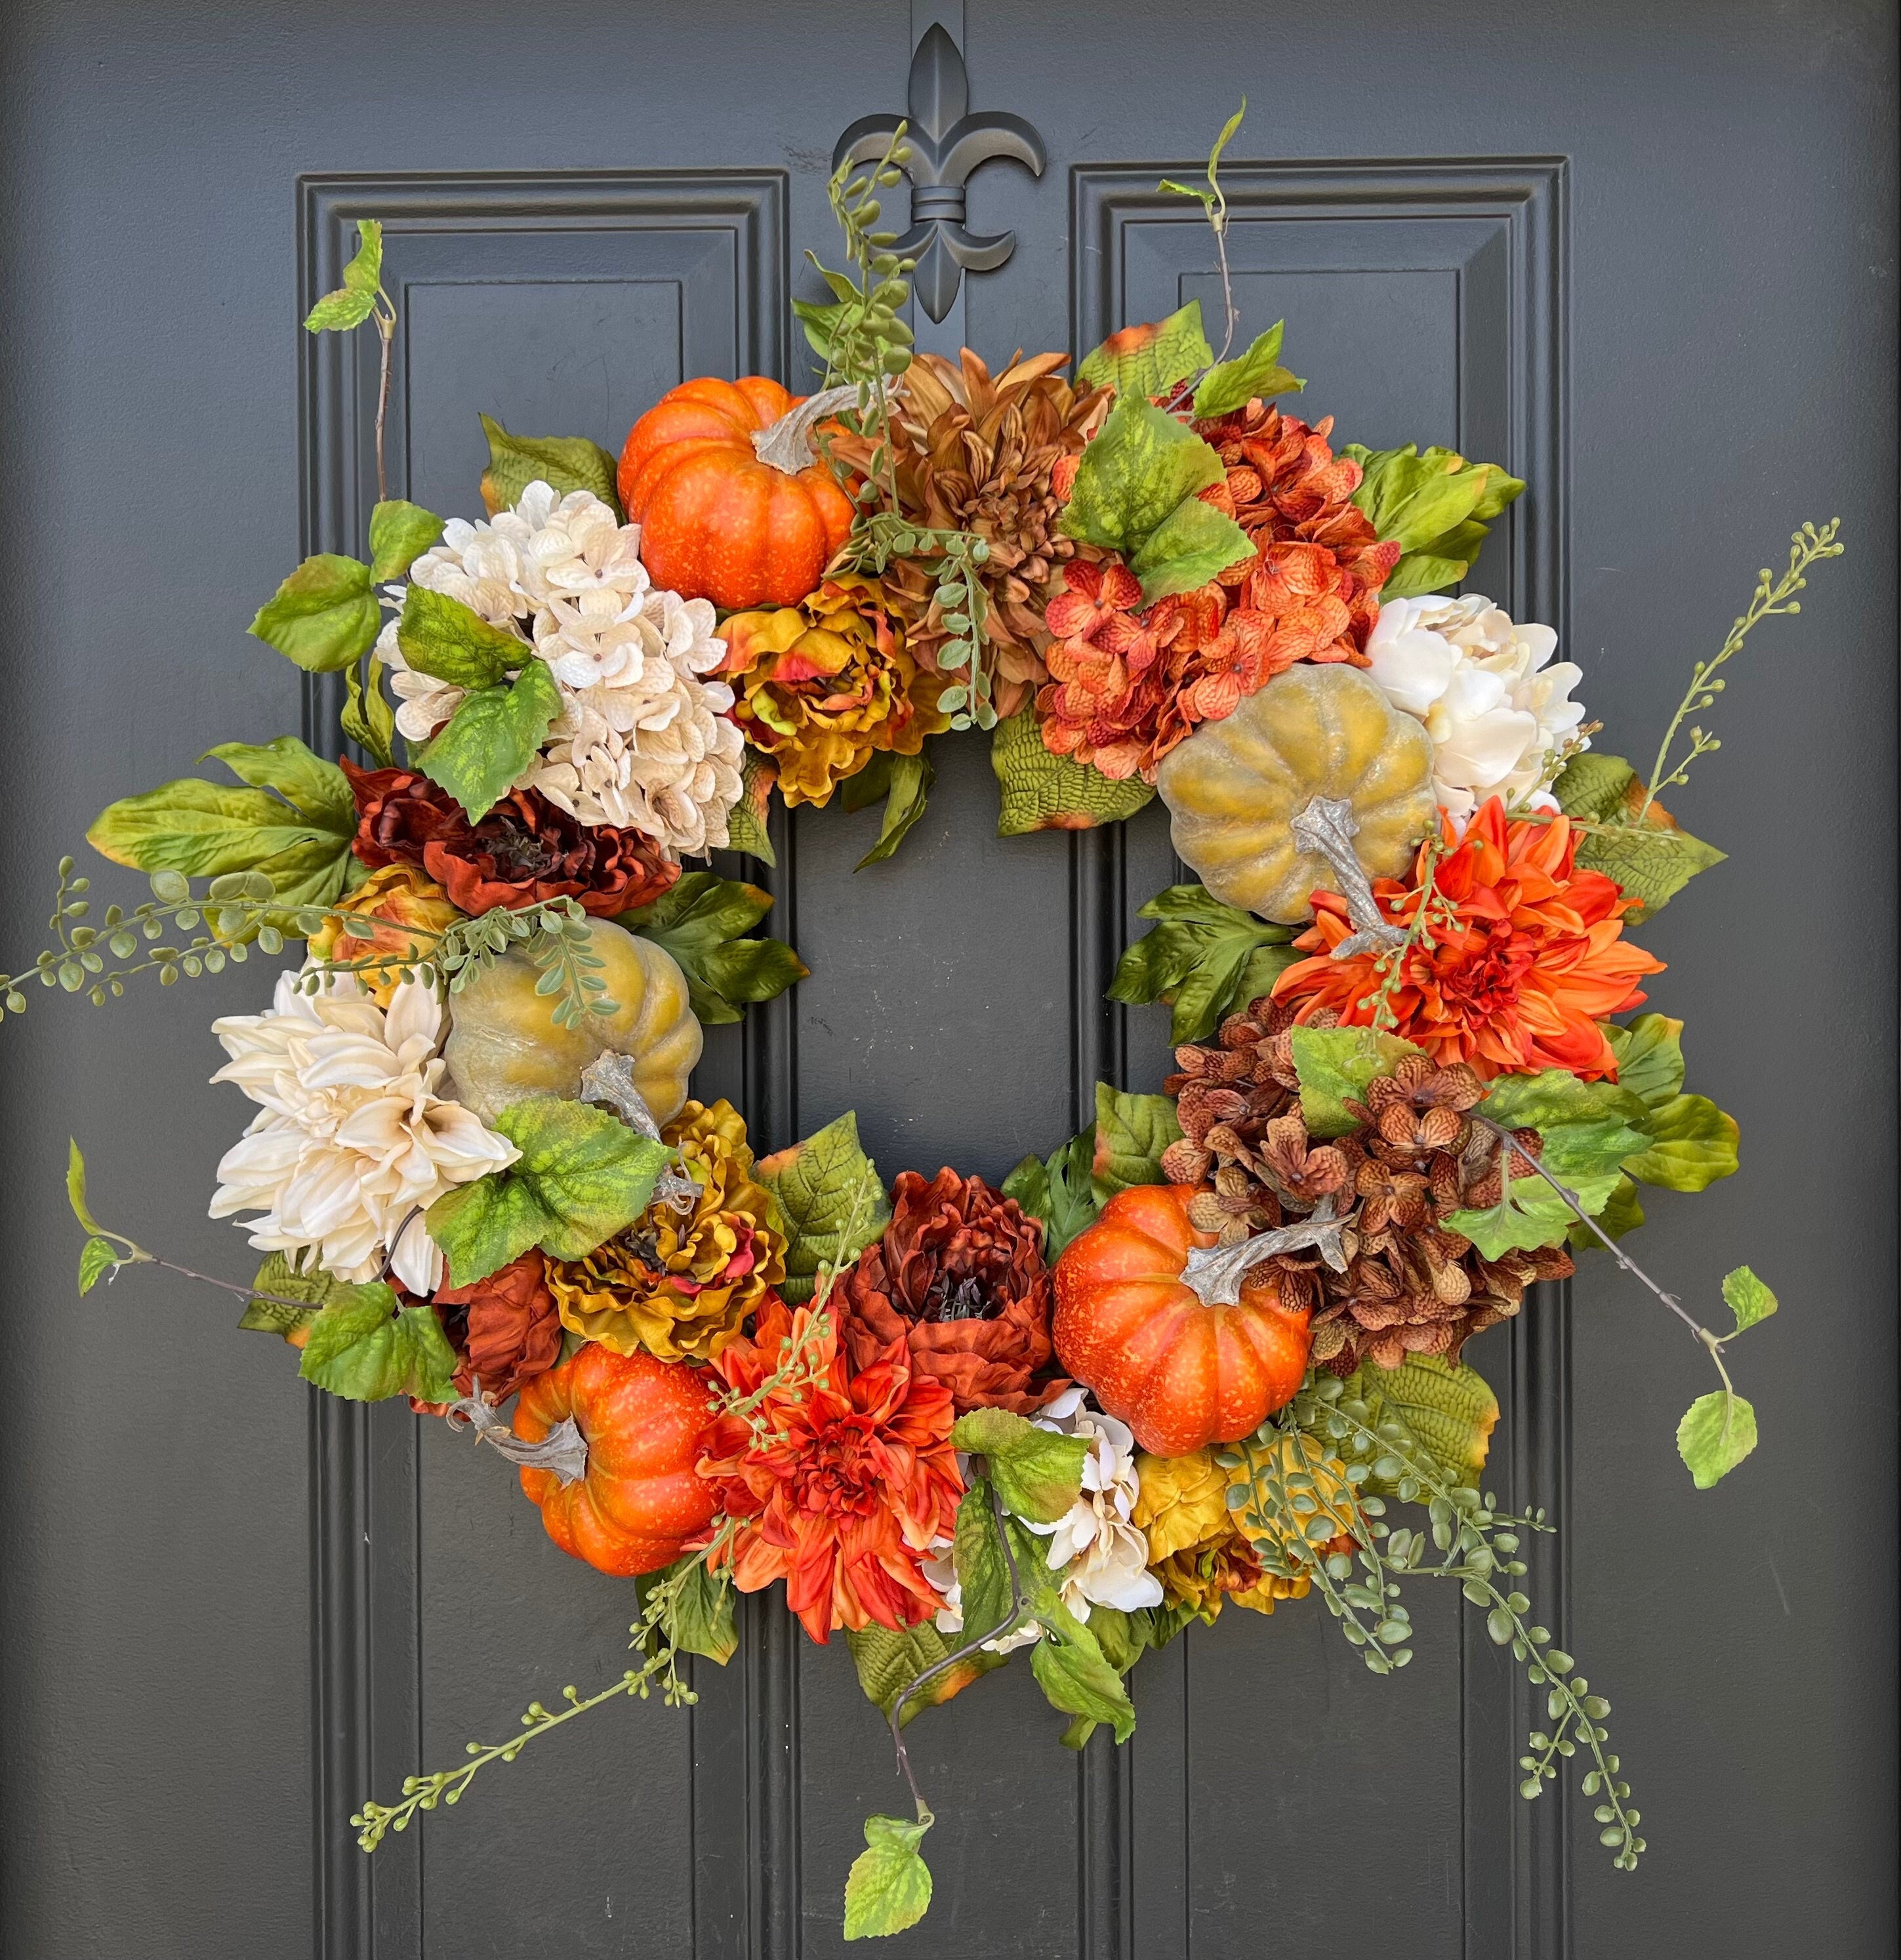 Fall Wreaths for Front Door Peony Wreaths for Door Outside Autumn Wreaths  18 inch Front Door Wreath Spring Wreaths Winter Wreaths for Indoor or Window